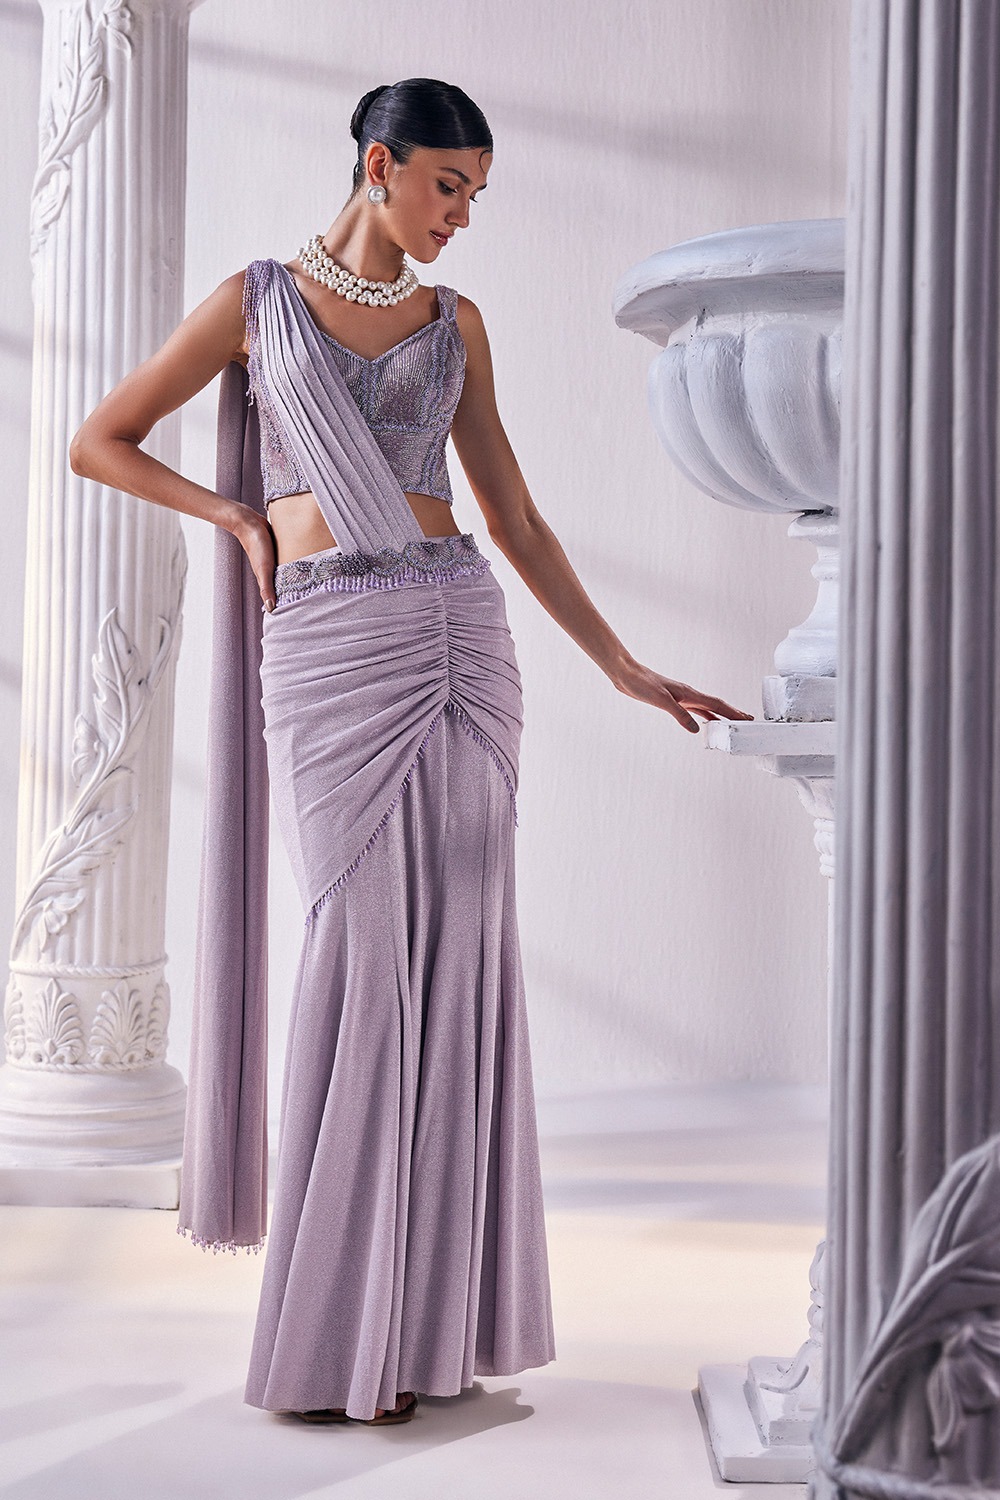 Shimmer Lycra Draped Saree With Corset And a Belt